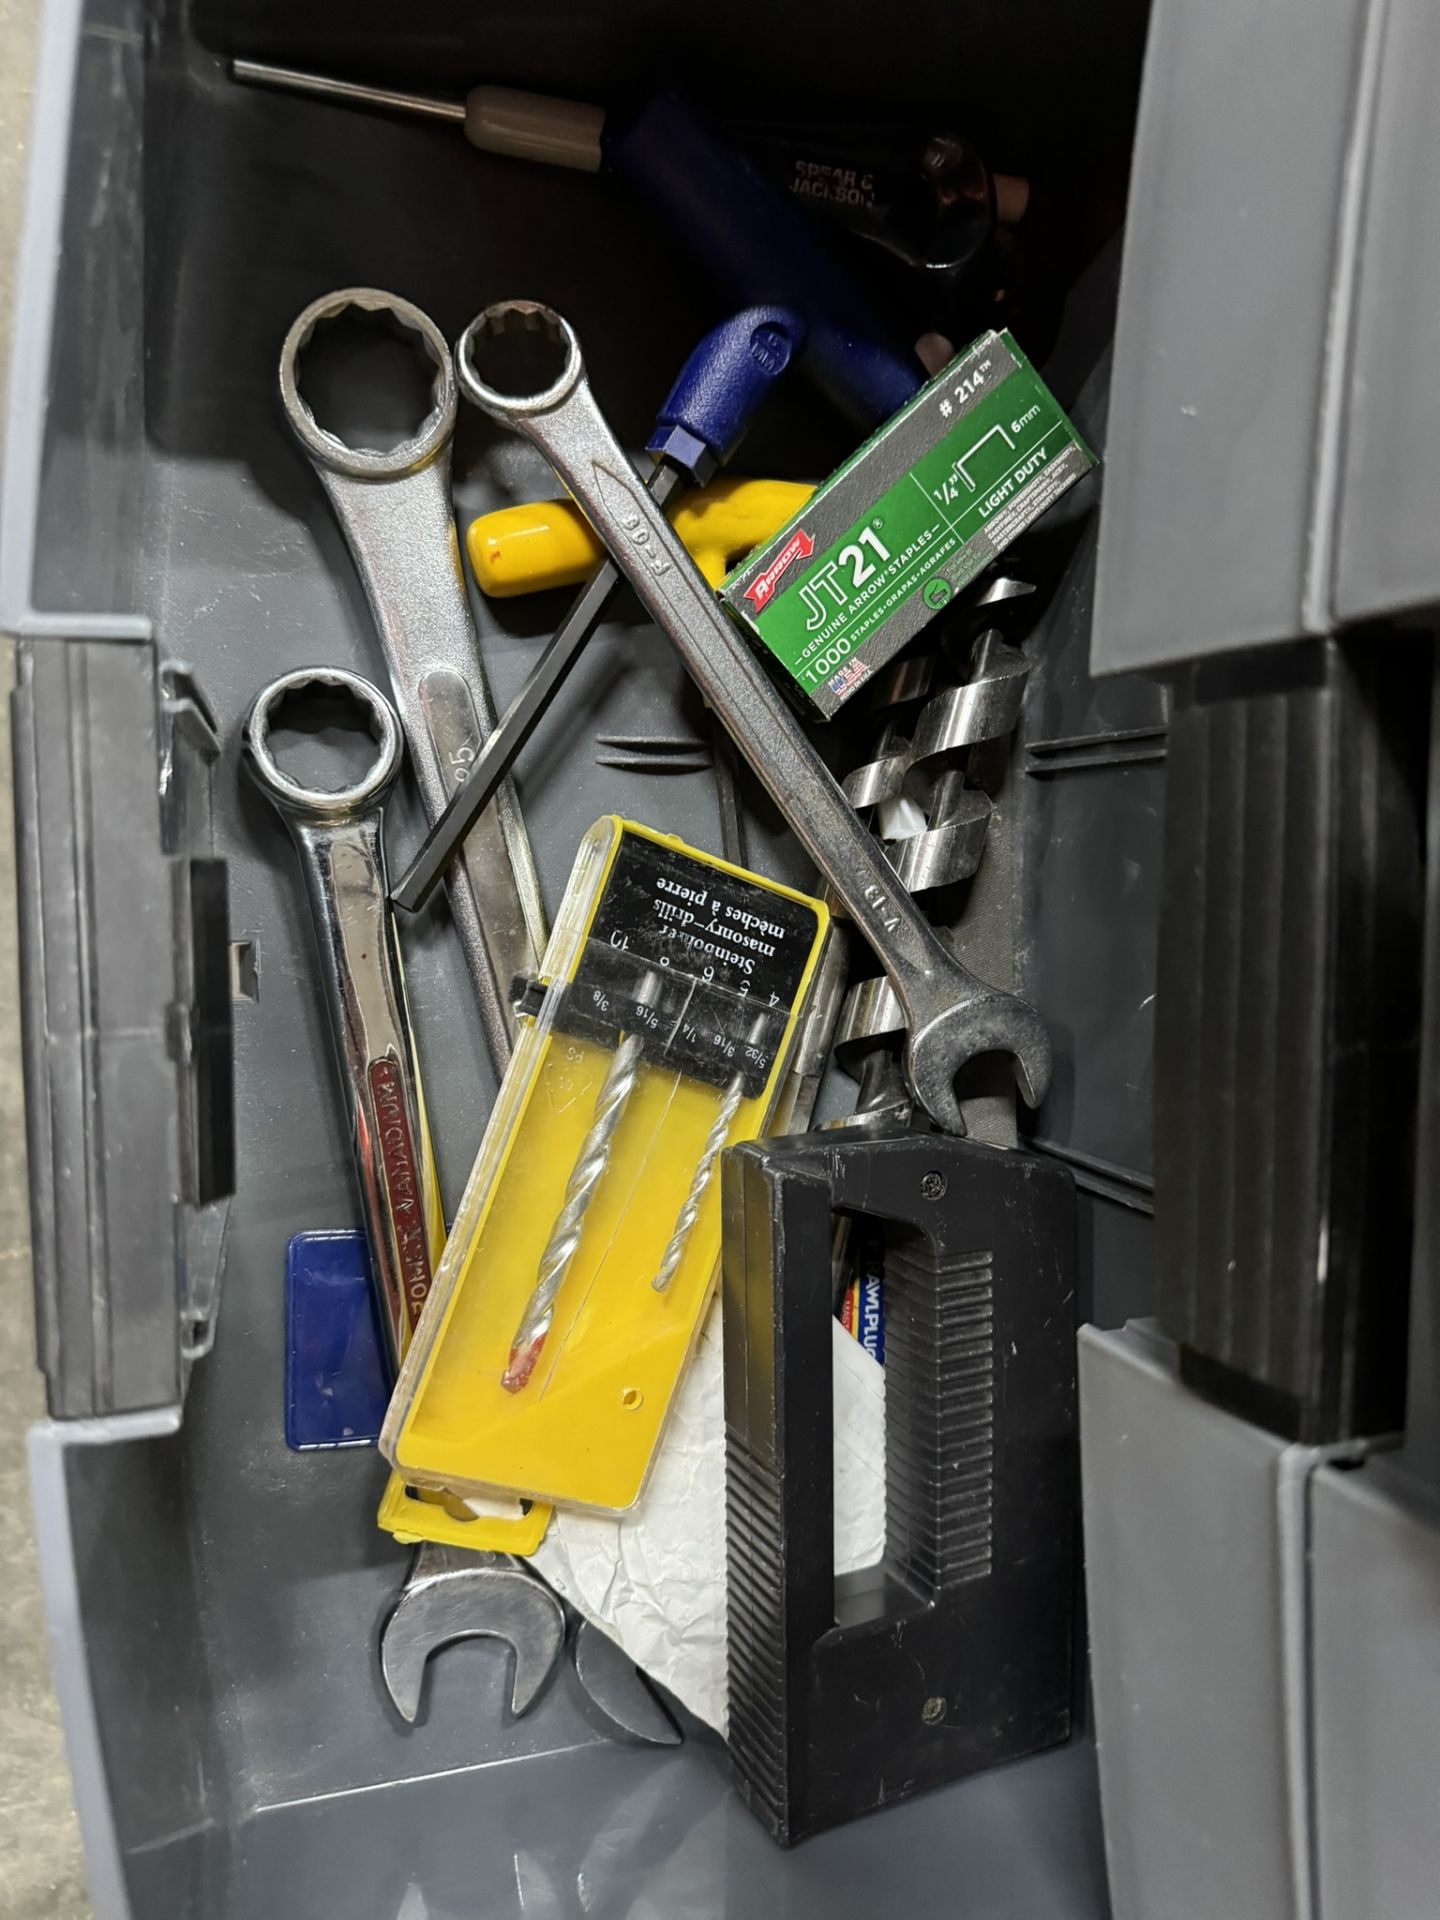 Stanley Rolling Workshop XL Mobile Tool Organiser With Various Tools & Accessories - Image 4 of 8